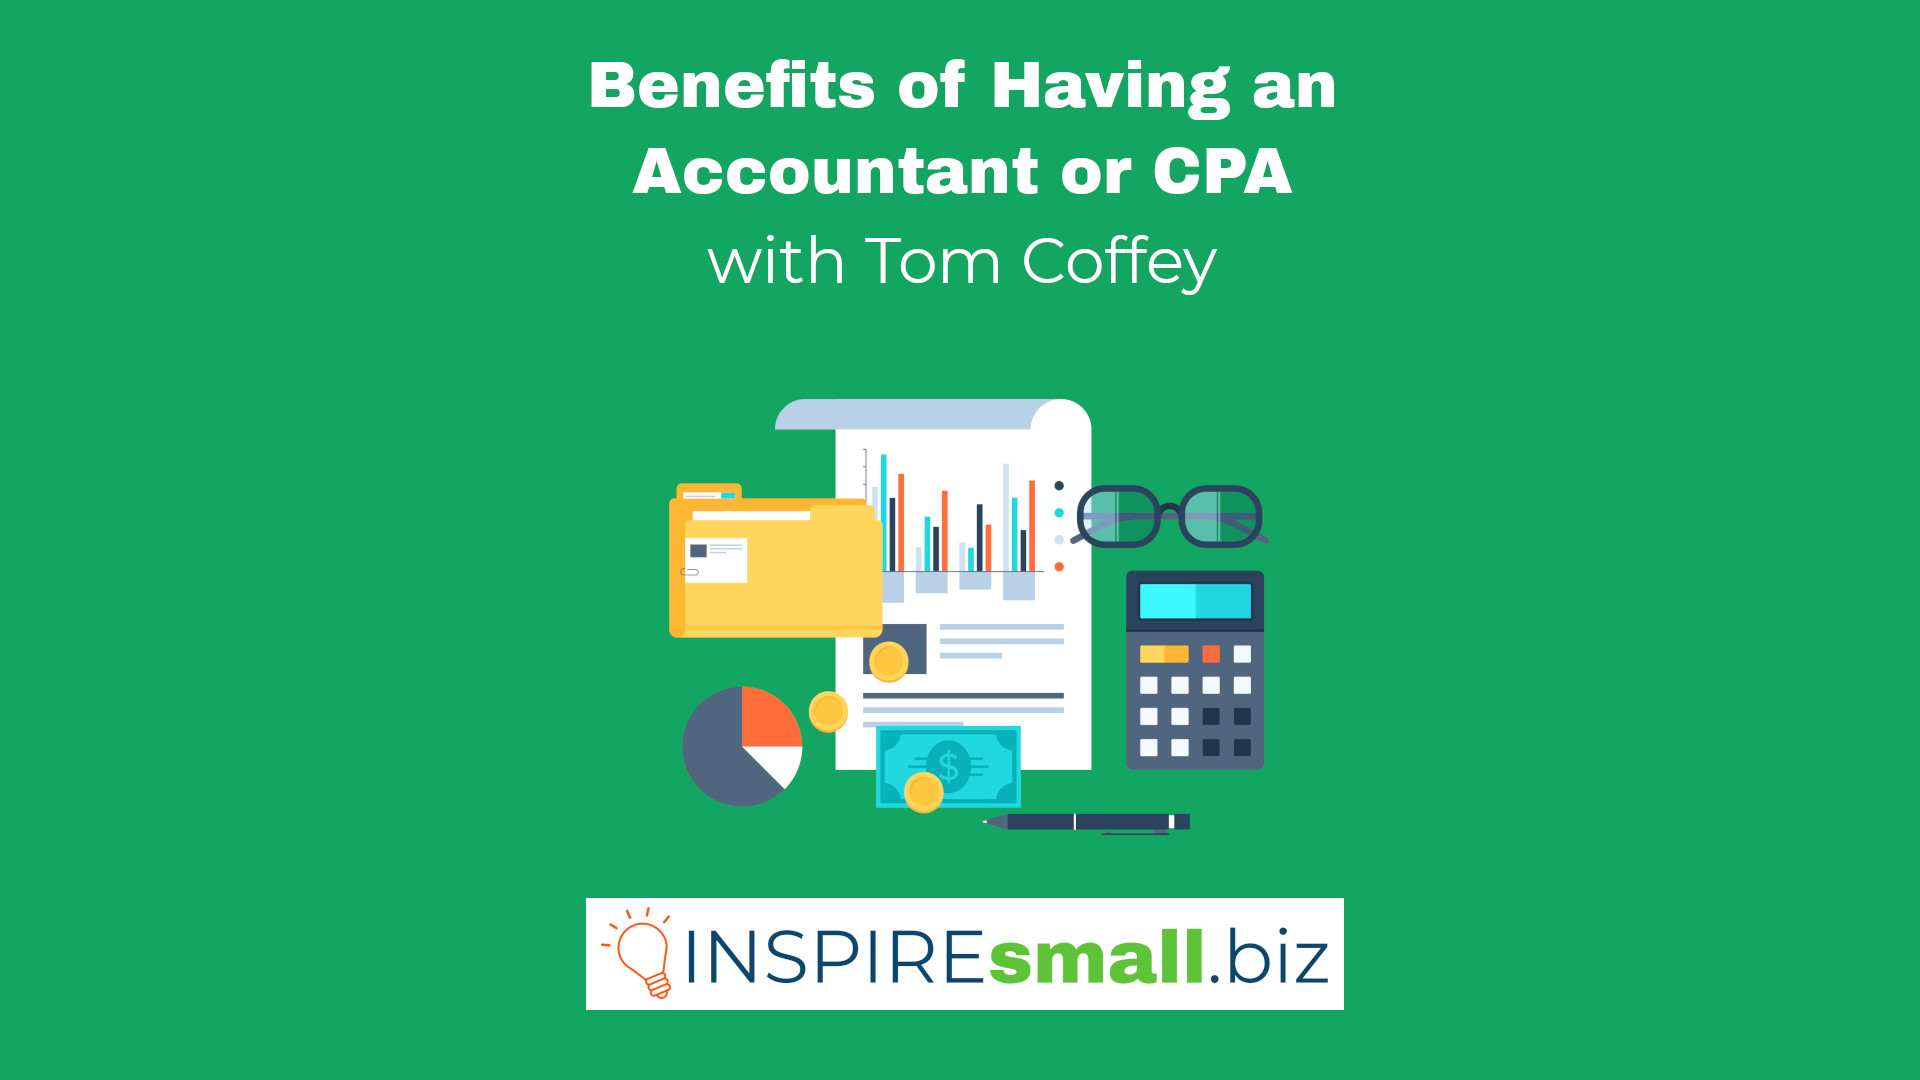 Benefits of Having an Accountant or CPA